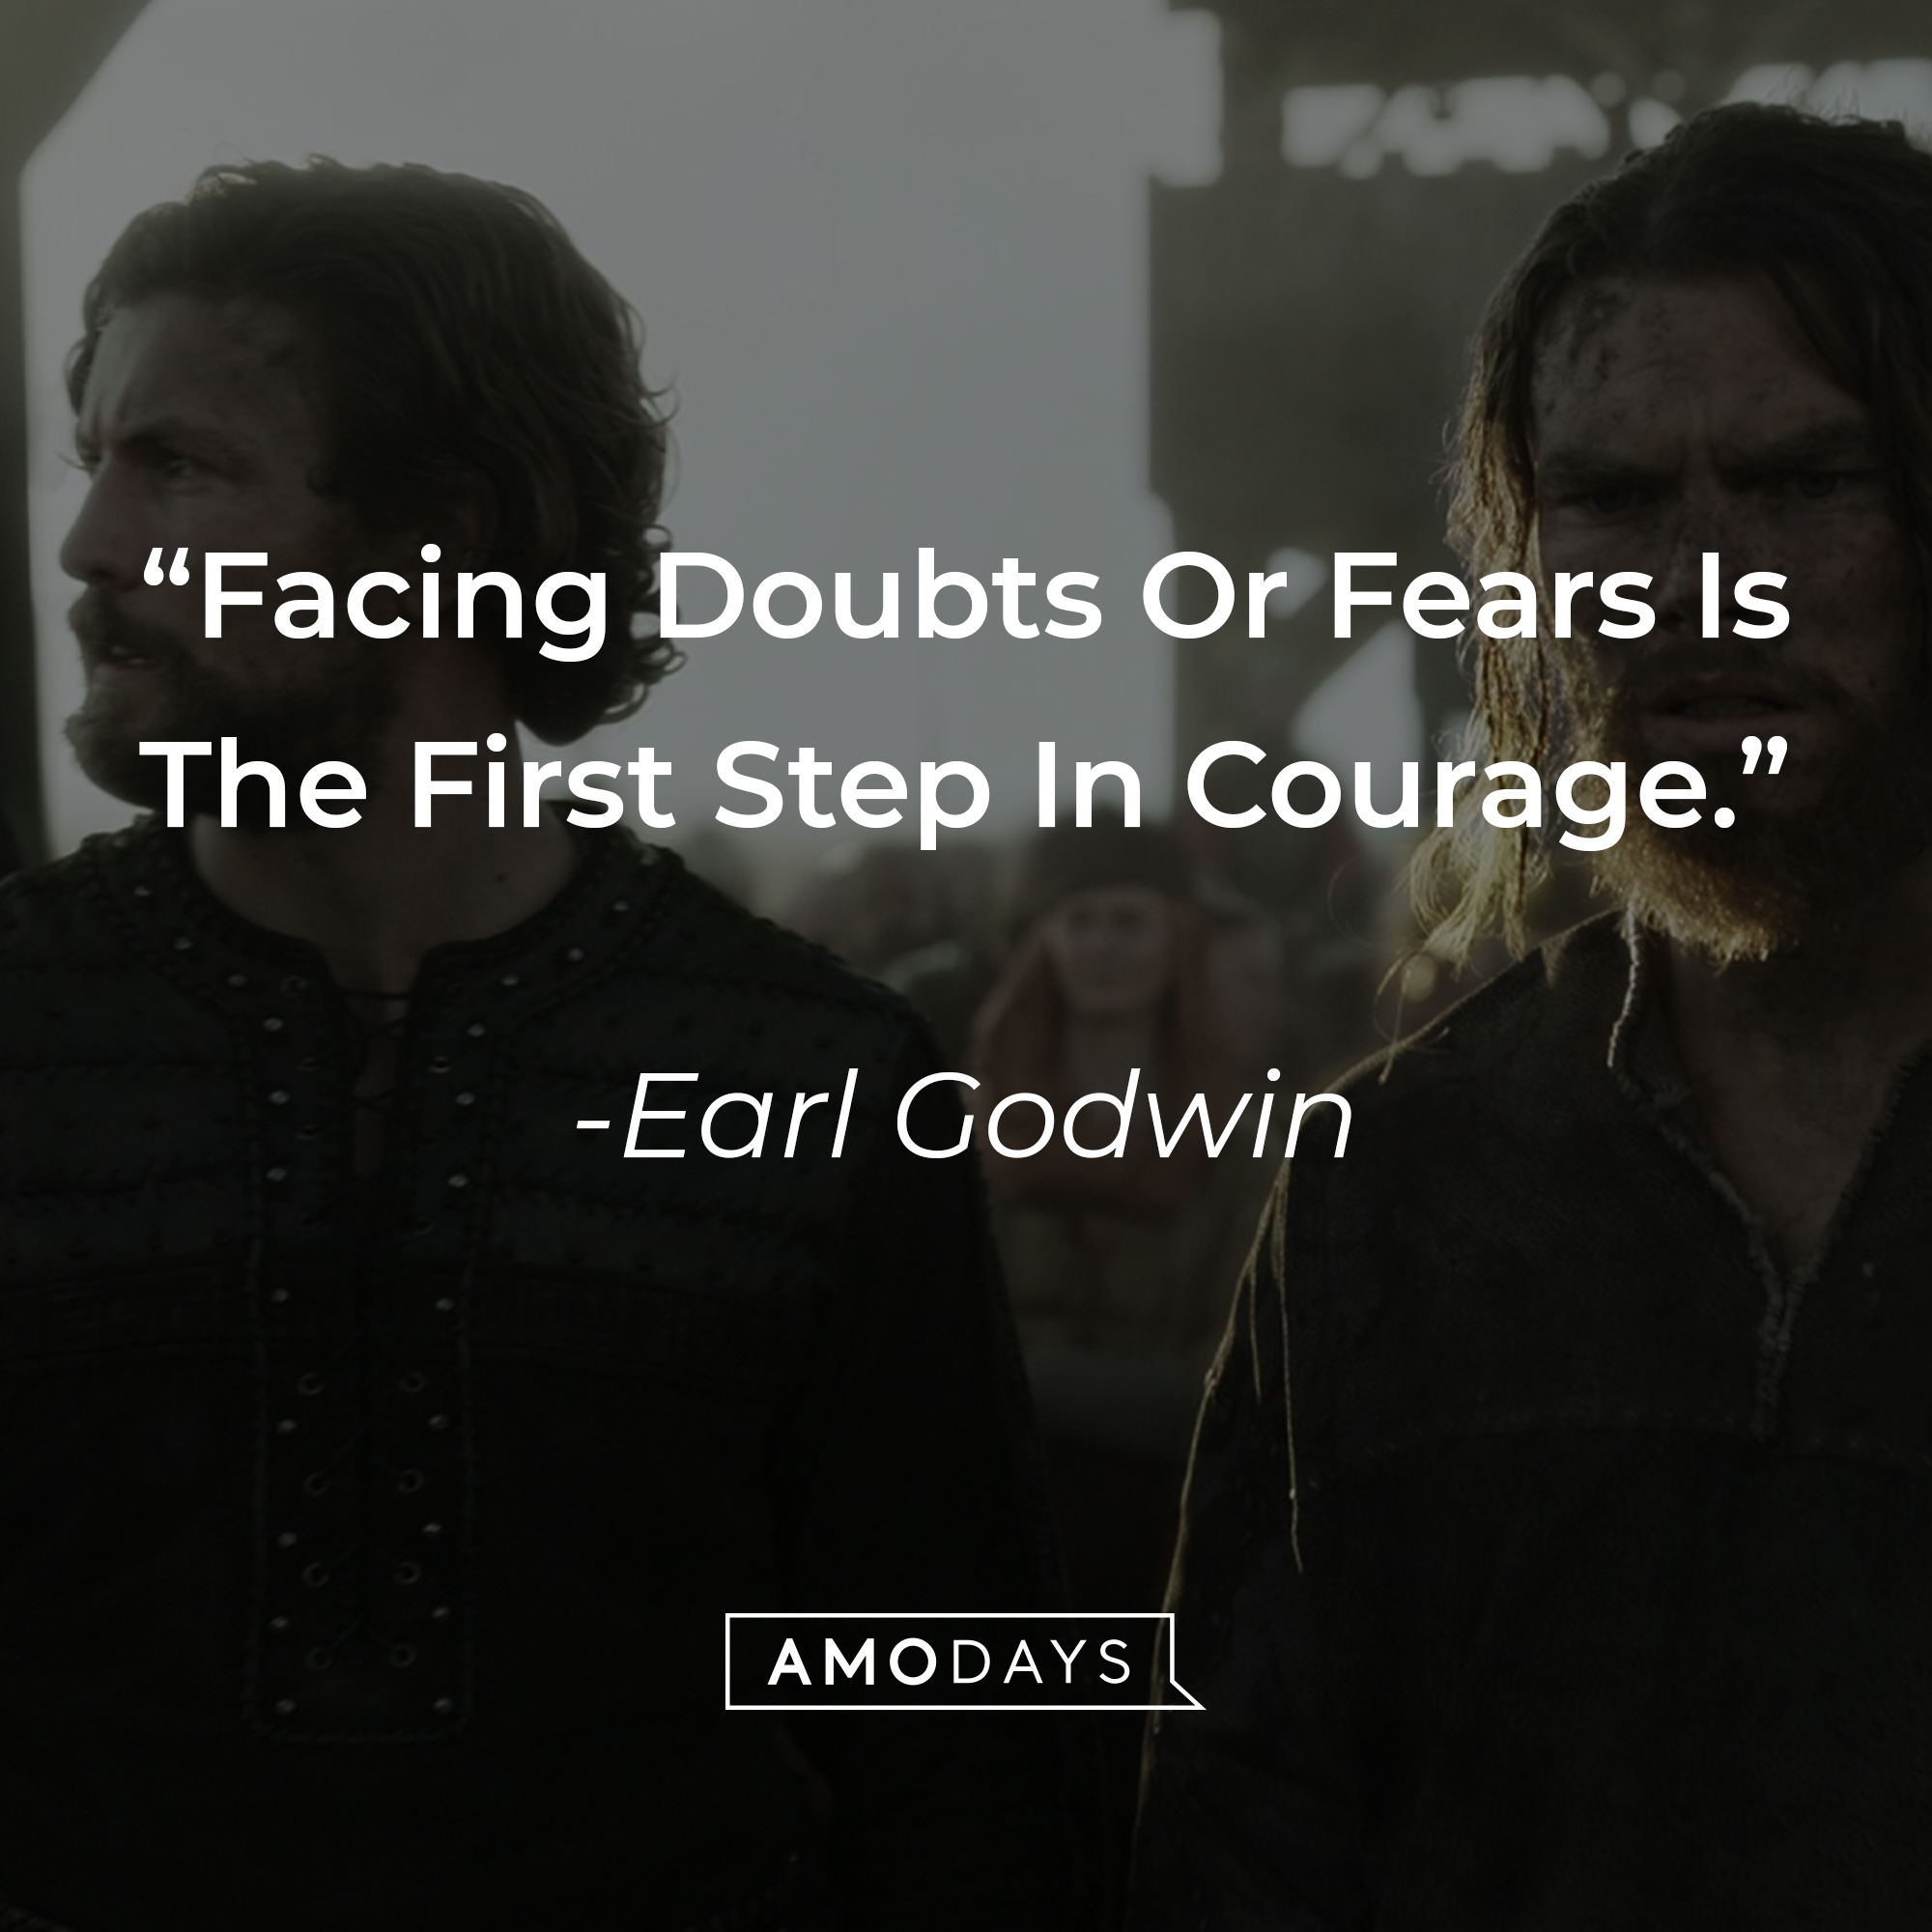 Earl Godwin's quote: "Facing Doubts Or Fears Is The First Step In Courage."┃Source: facebook.com/netflixvalhalla